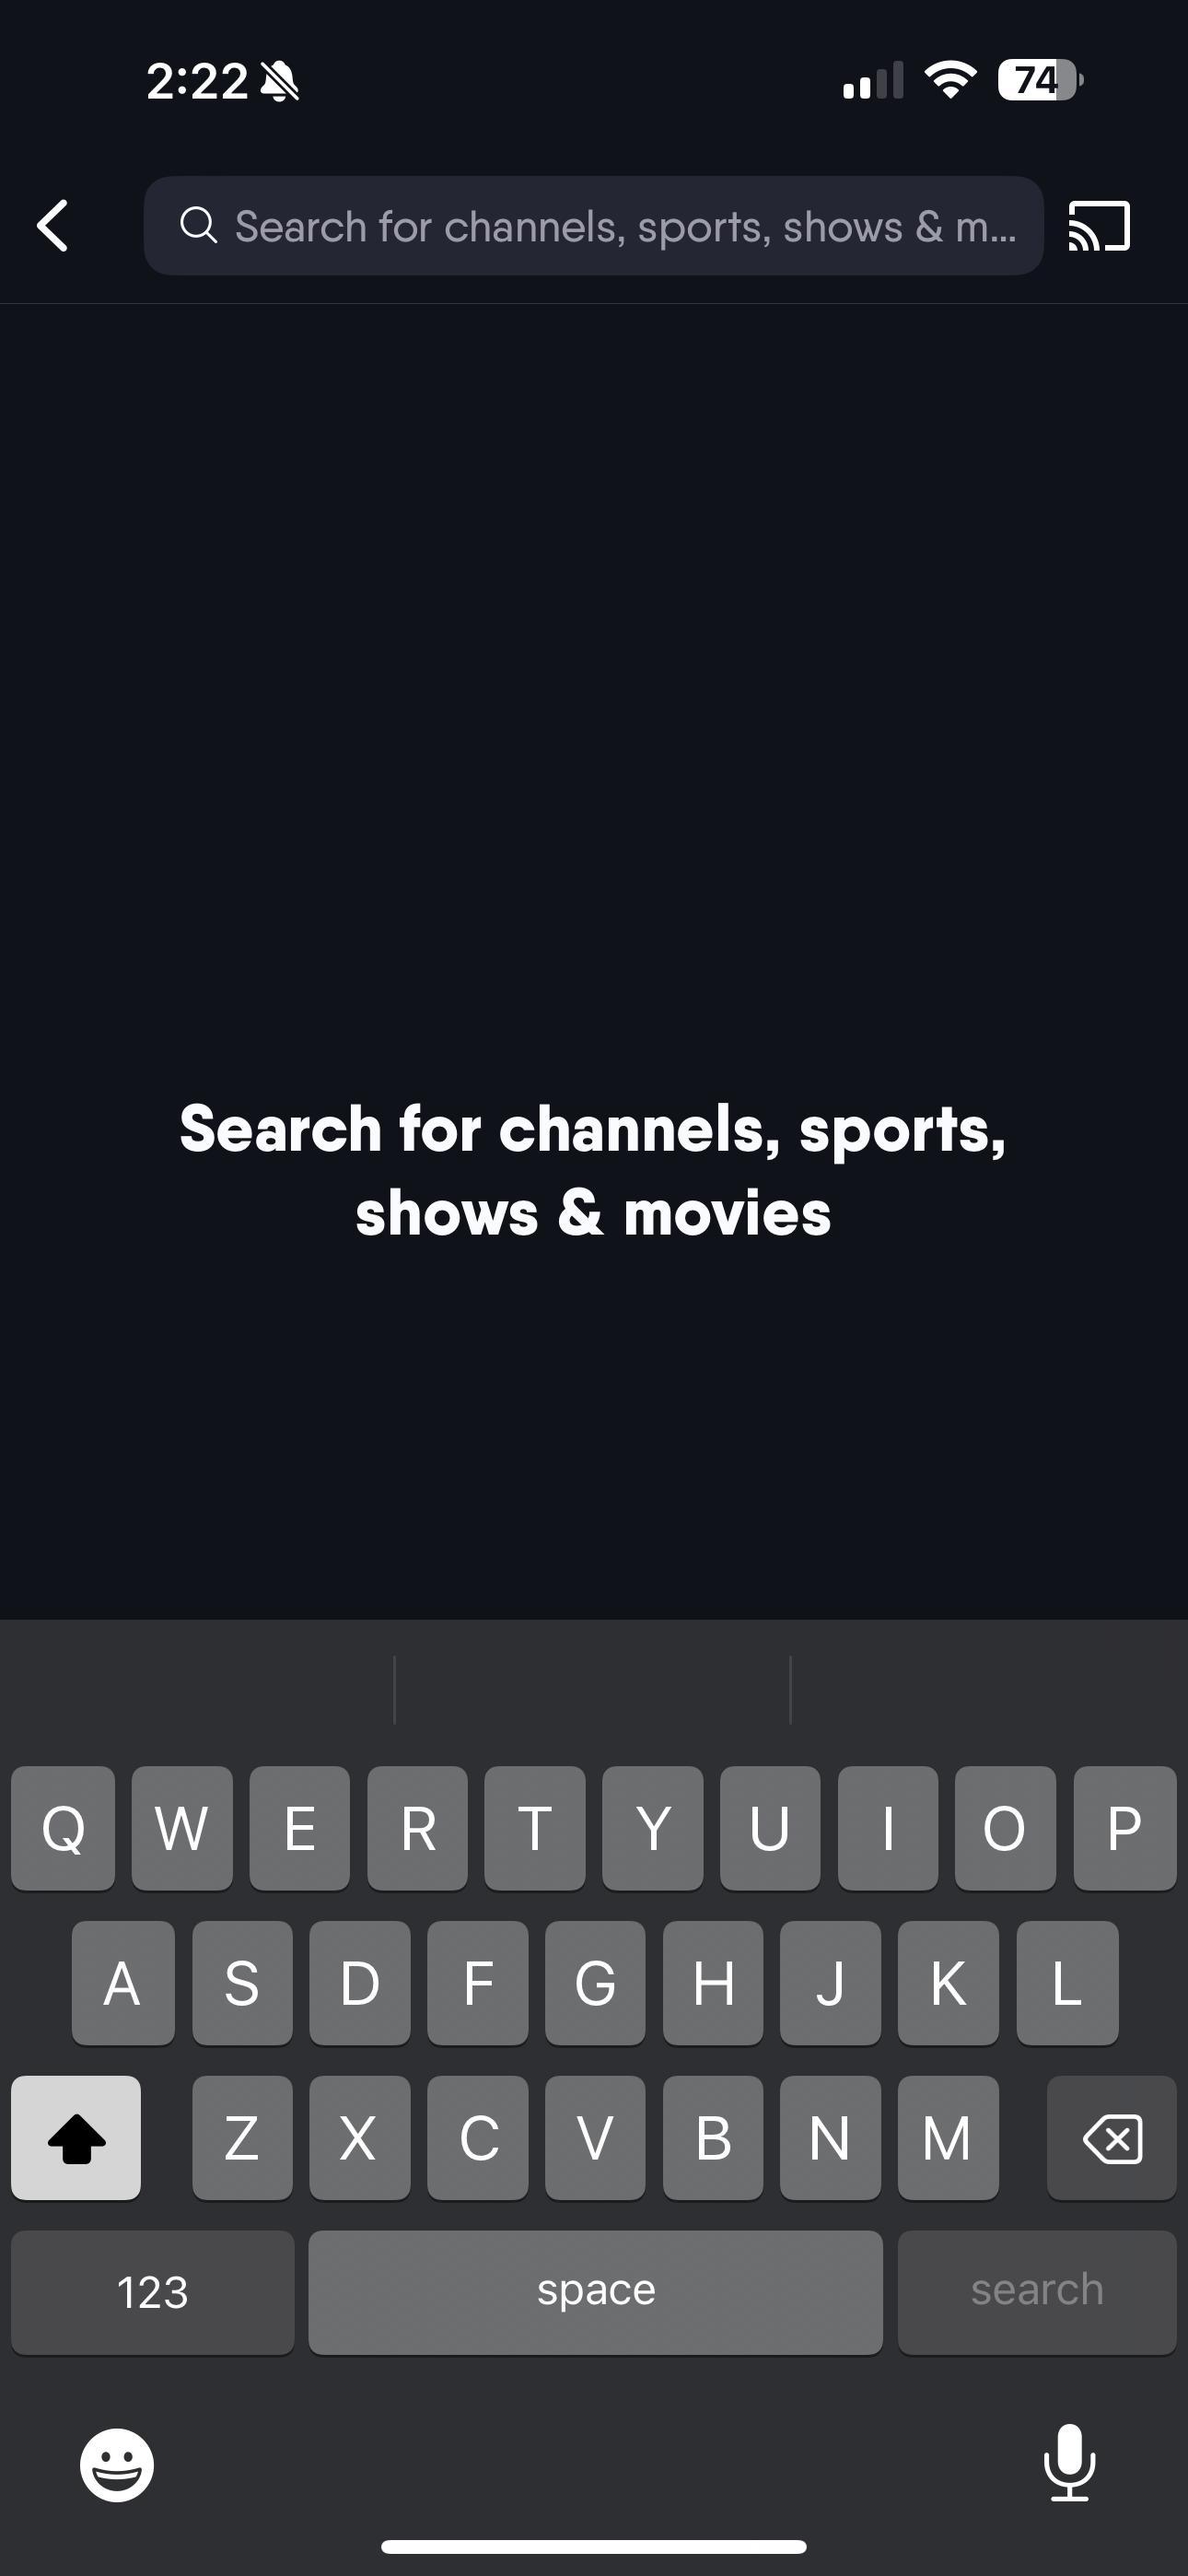 SEARCH screen of the Fubo app on iOS